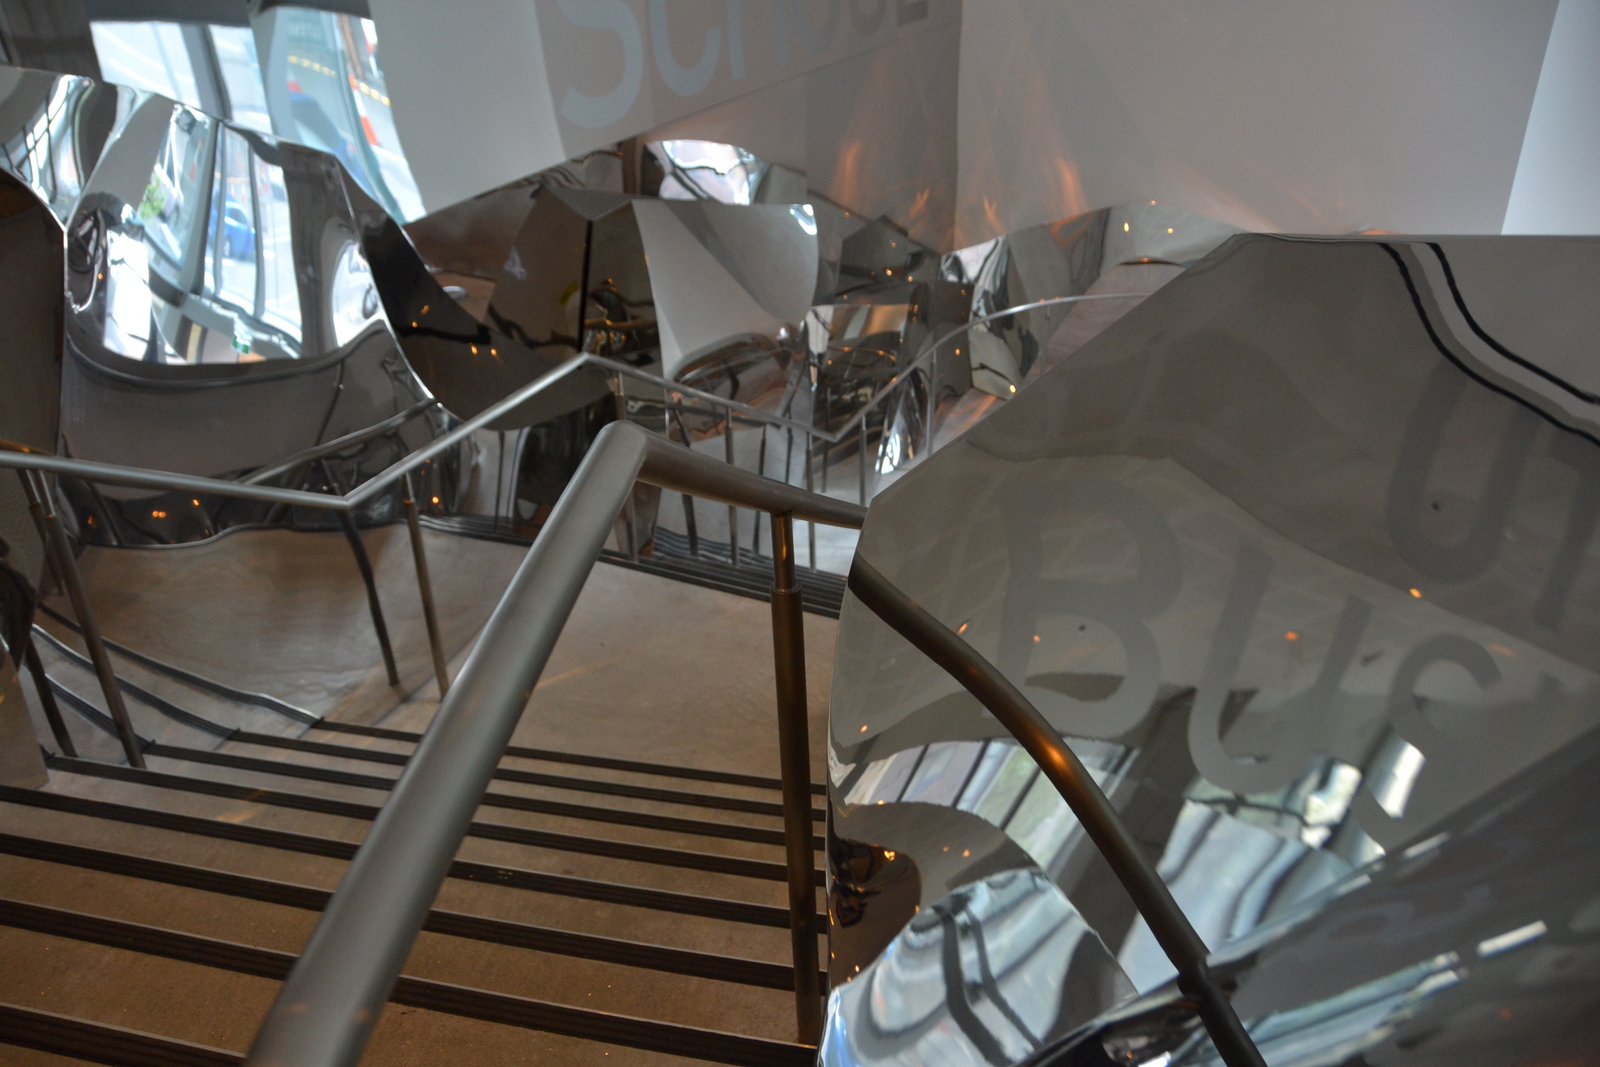 Inside the Frank Gehry-designed Dr Chau Chak Wing of the UTS. Photo Designer's Atelier